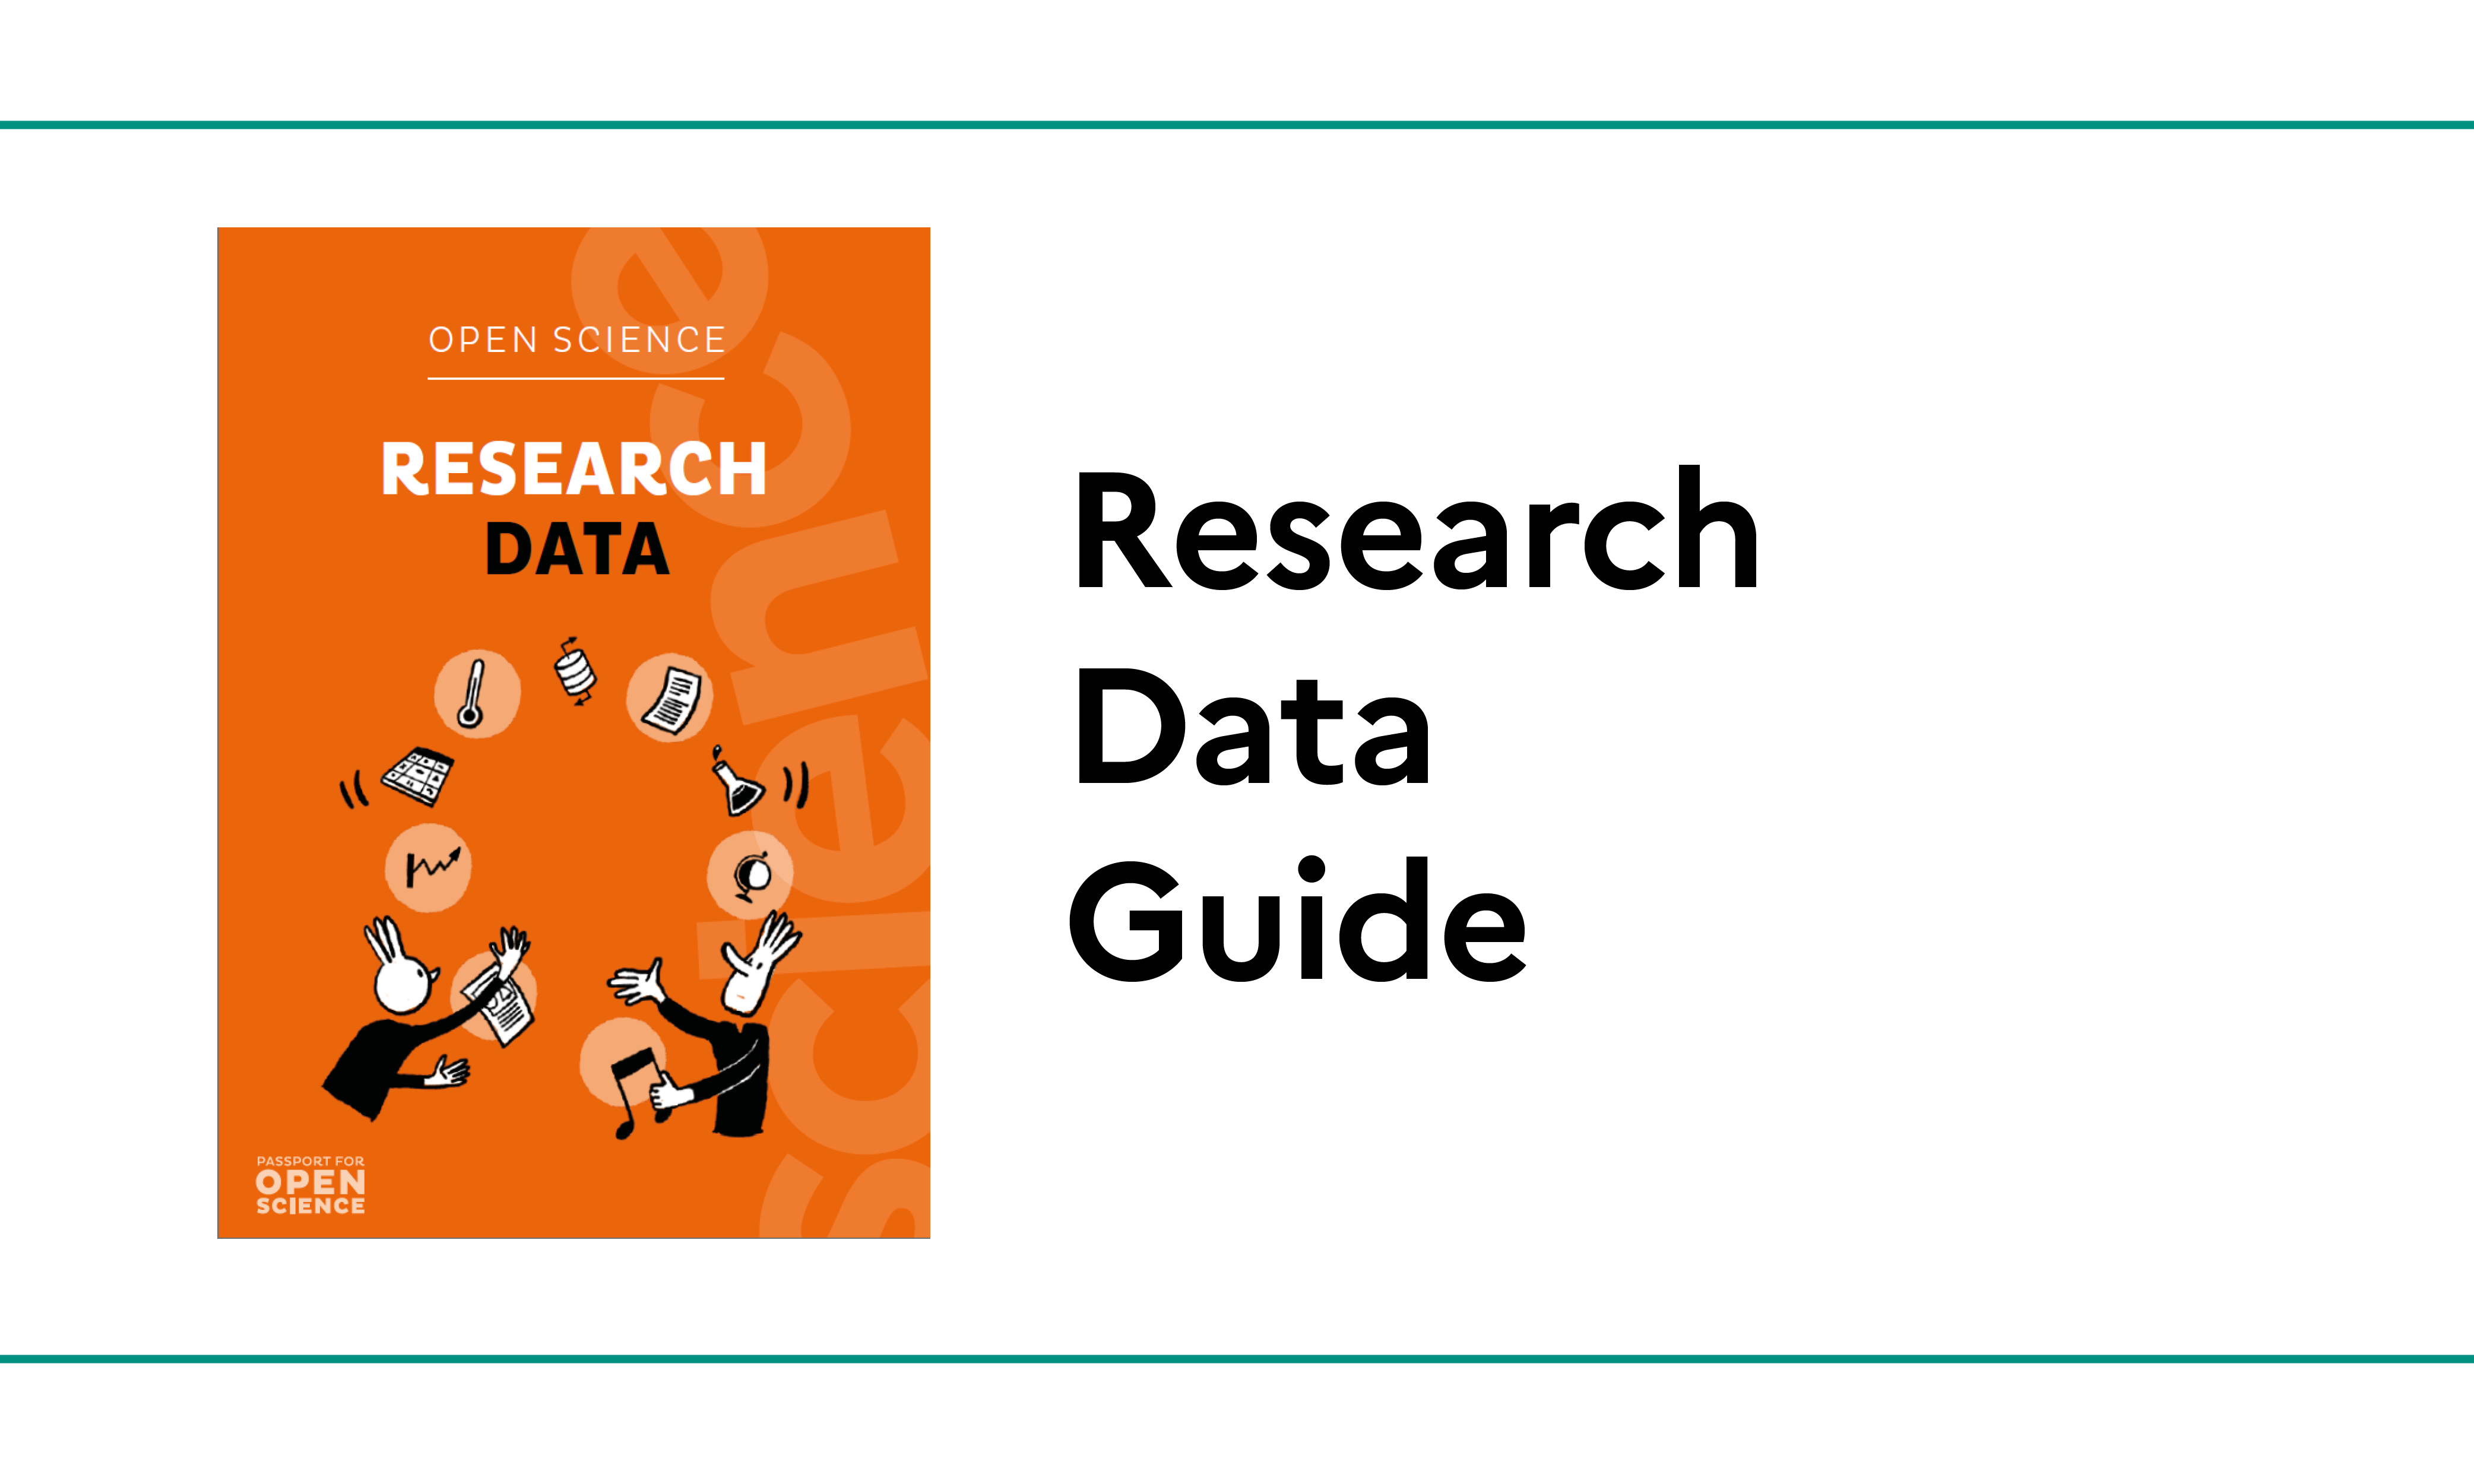 Research data, the new guide!